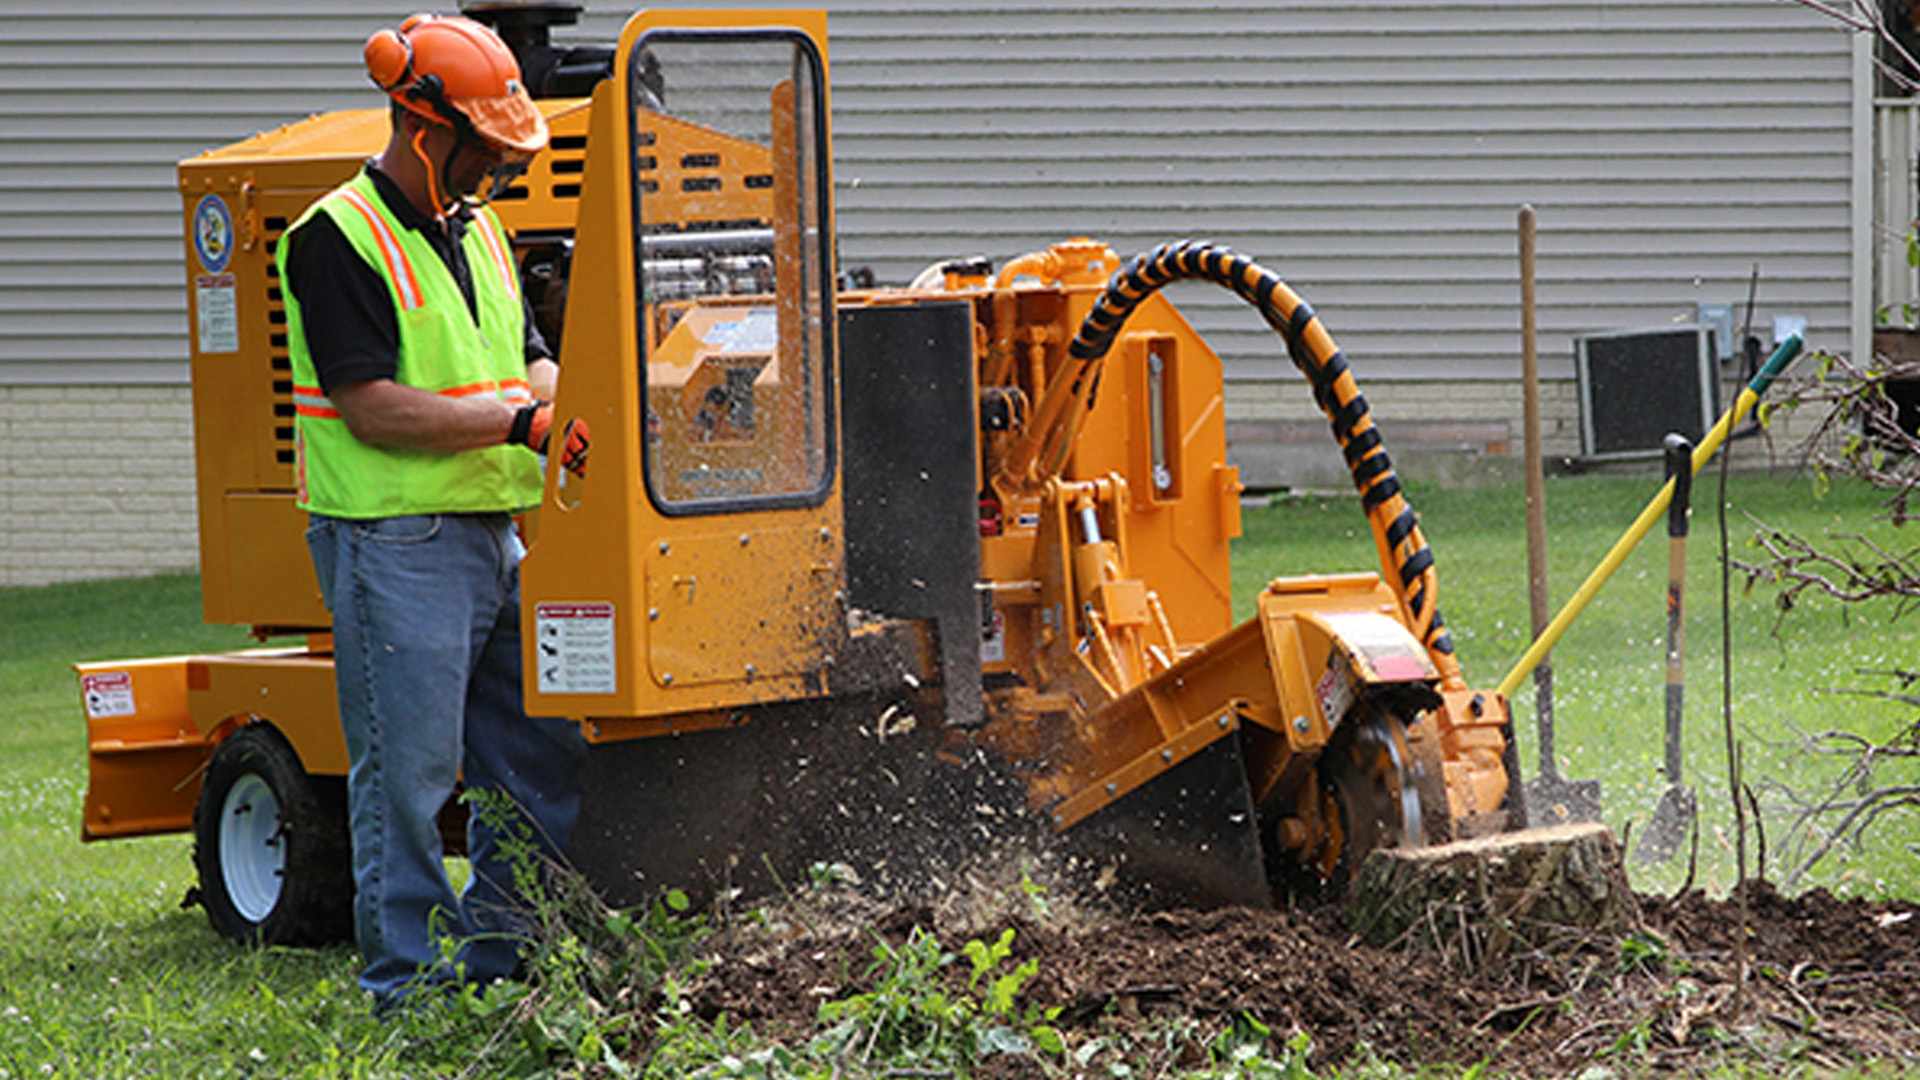 Bandit Stump Grinder 2890 from Iron Source in Delaware